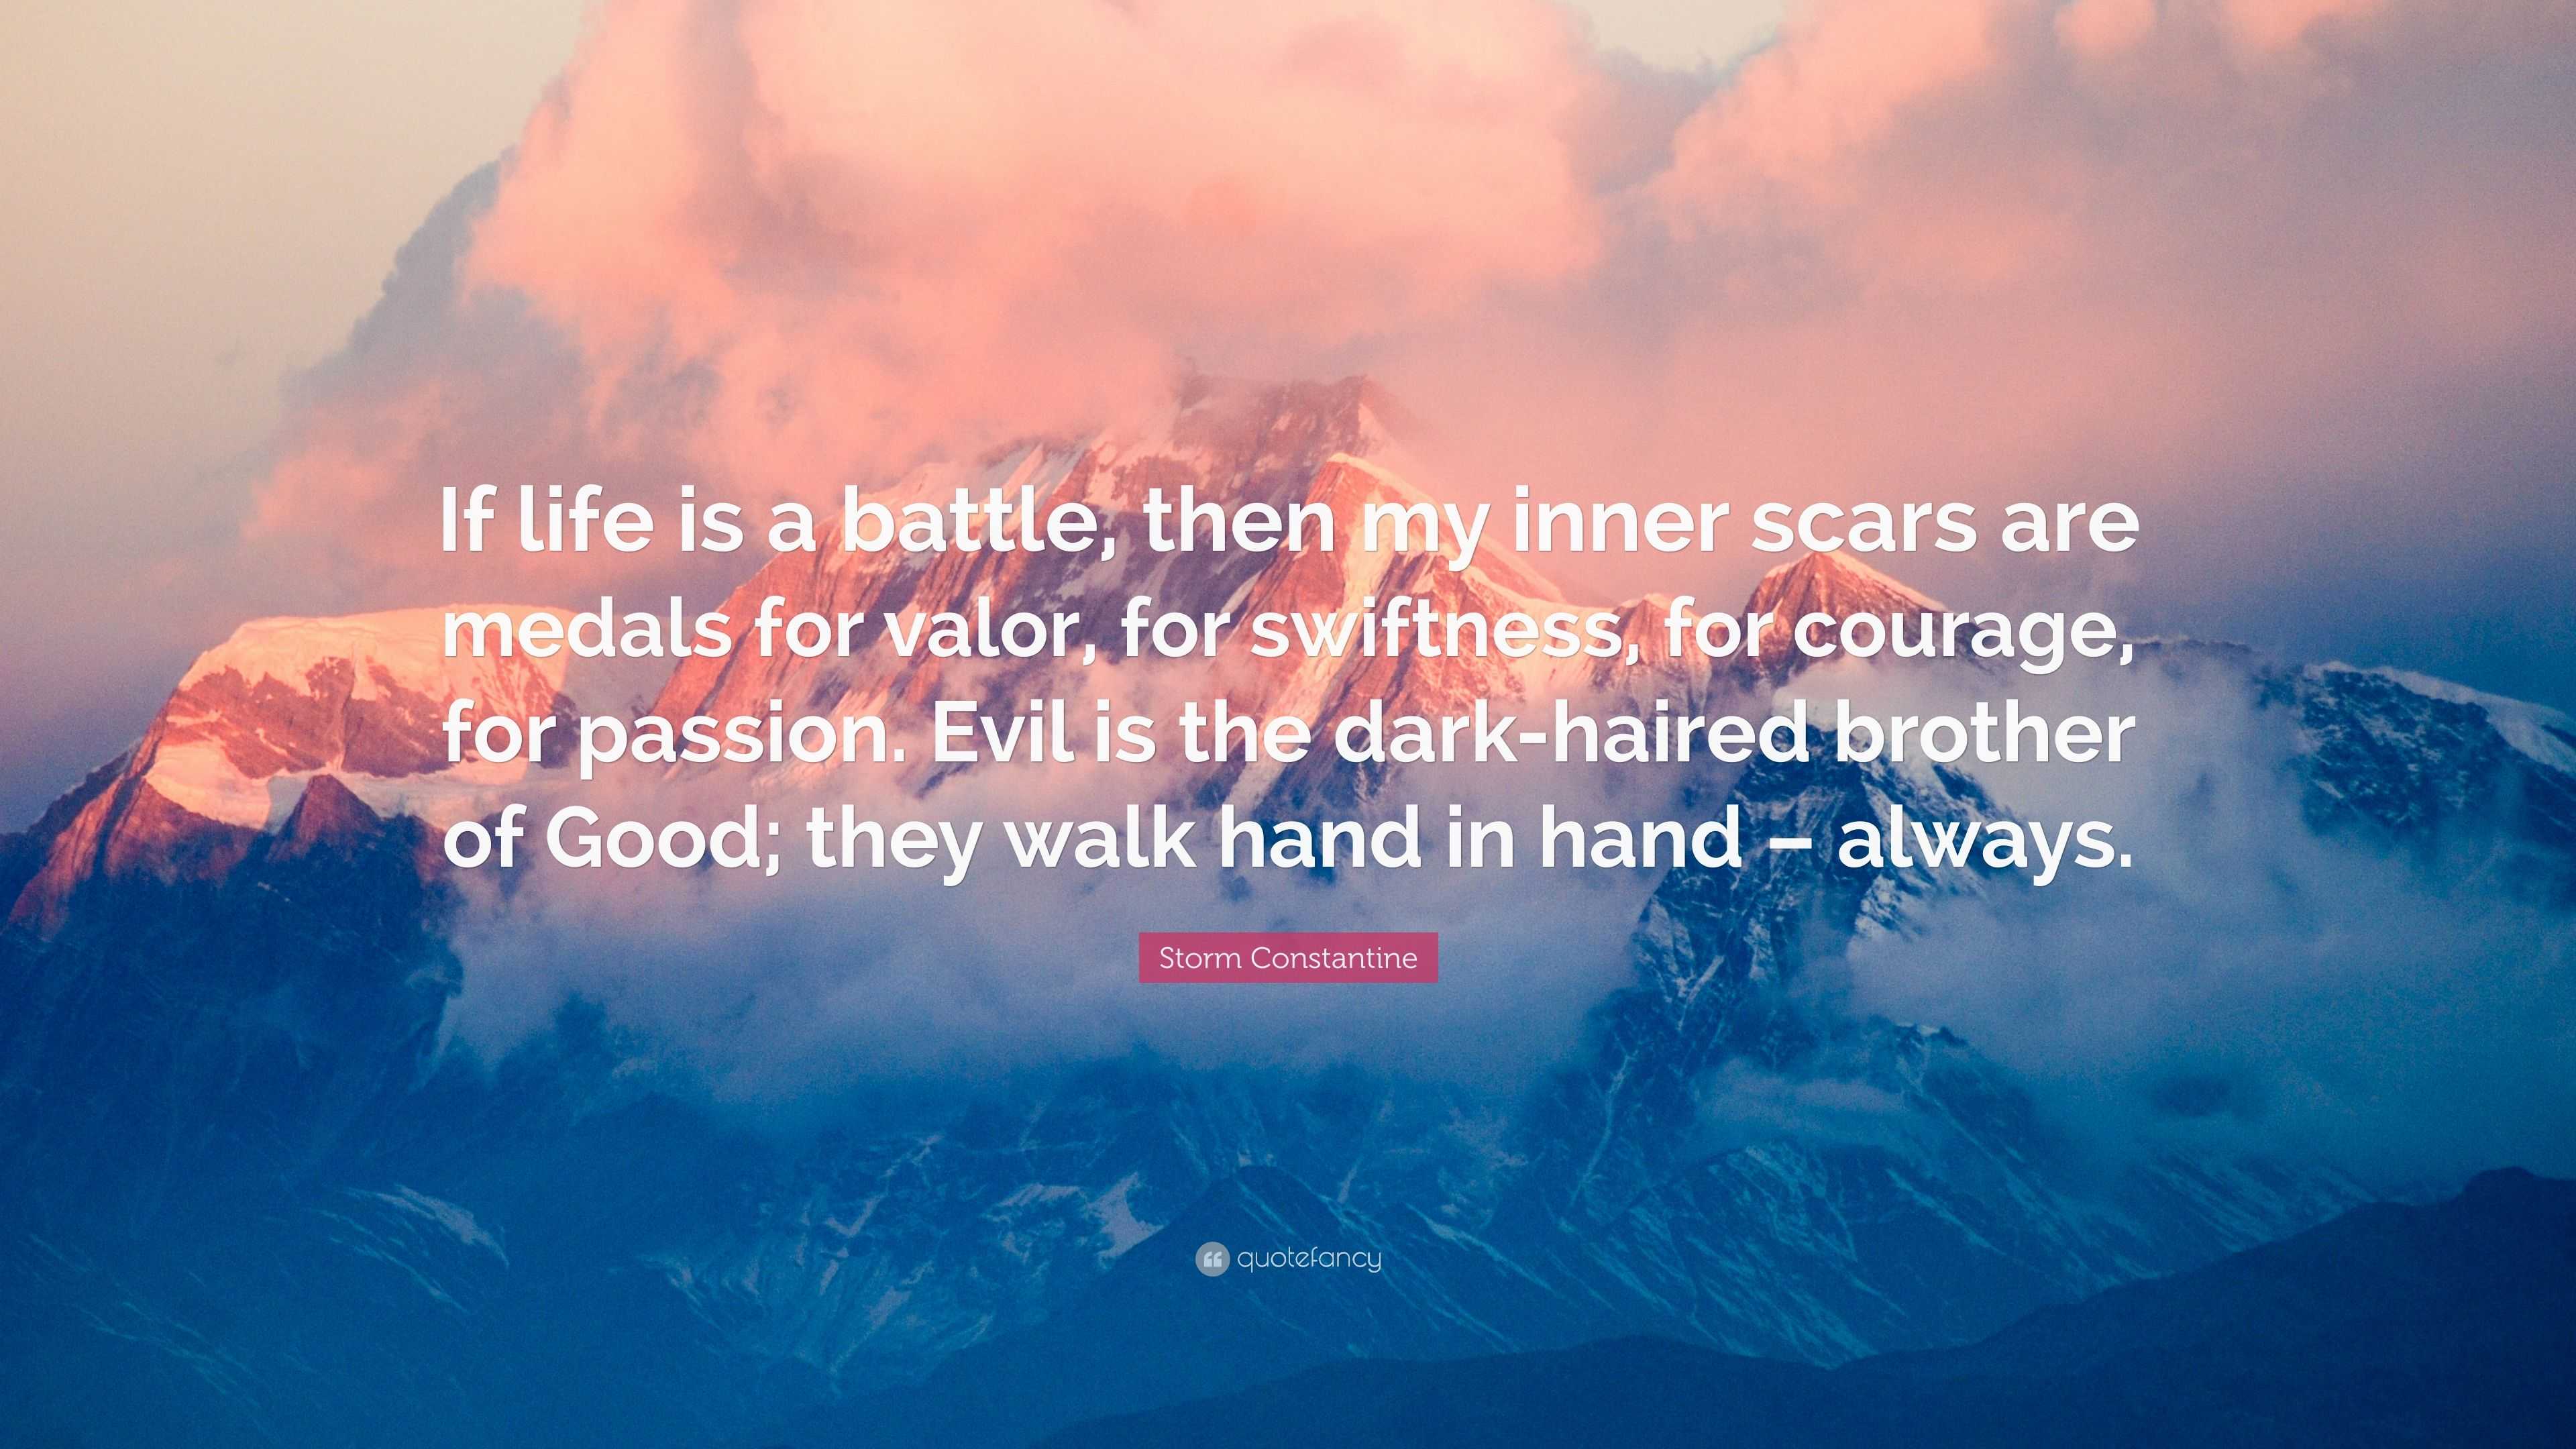 Storm Constantine Quote: “If life is a battle, then my inner scars are ...